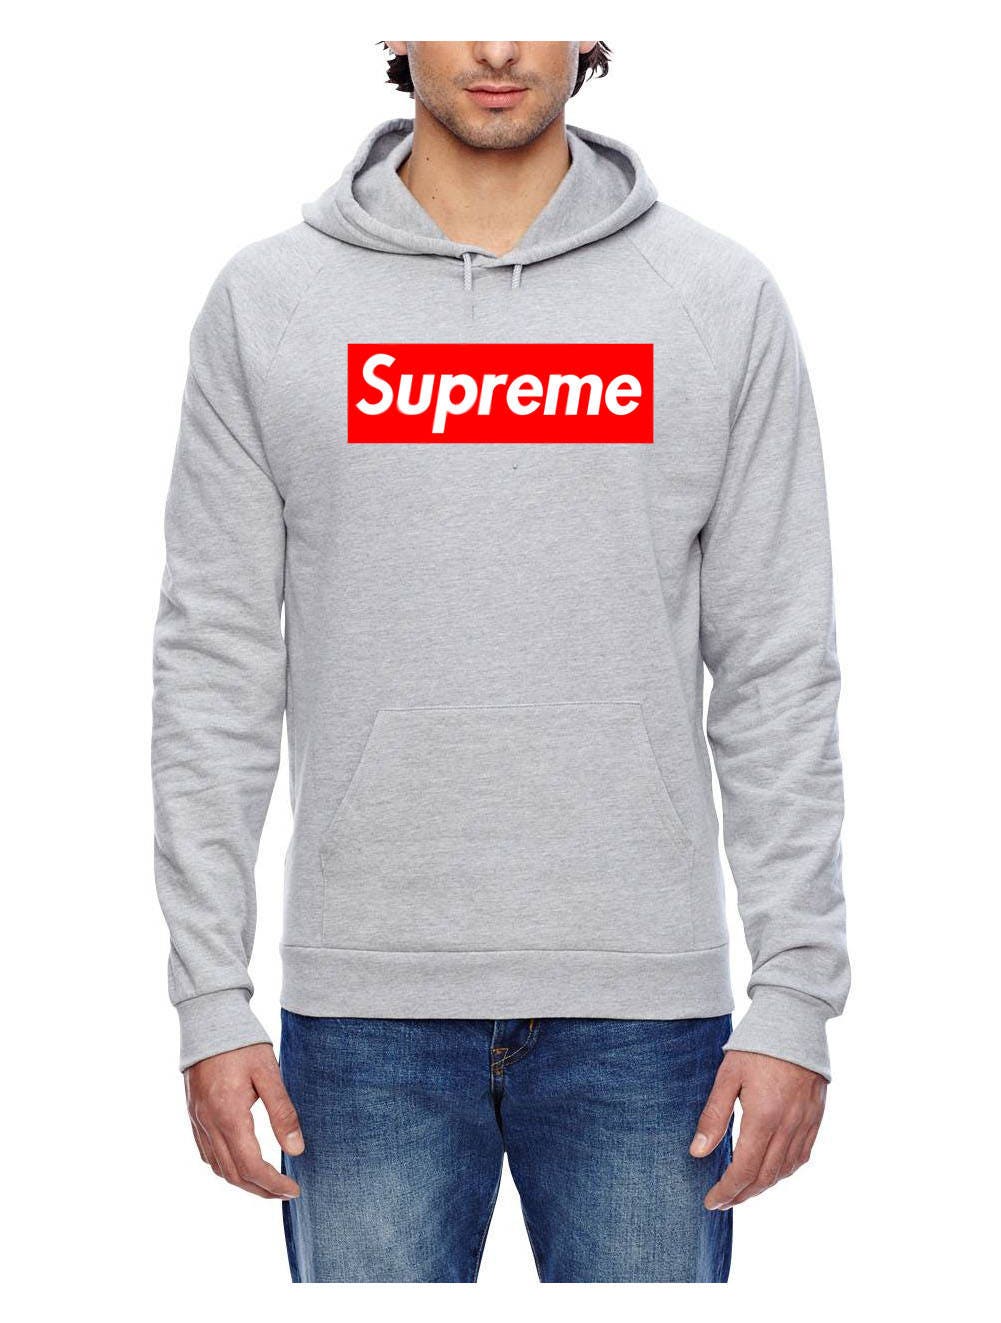 Supreme Hoodie Pullover Sweater Small To 345XL Big Sizes